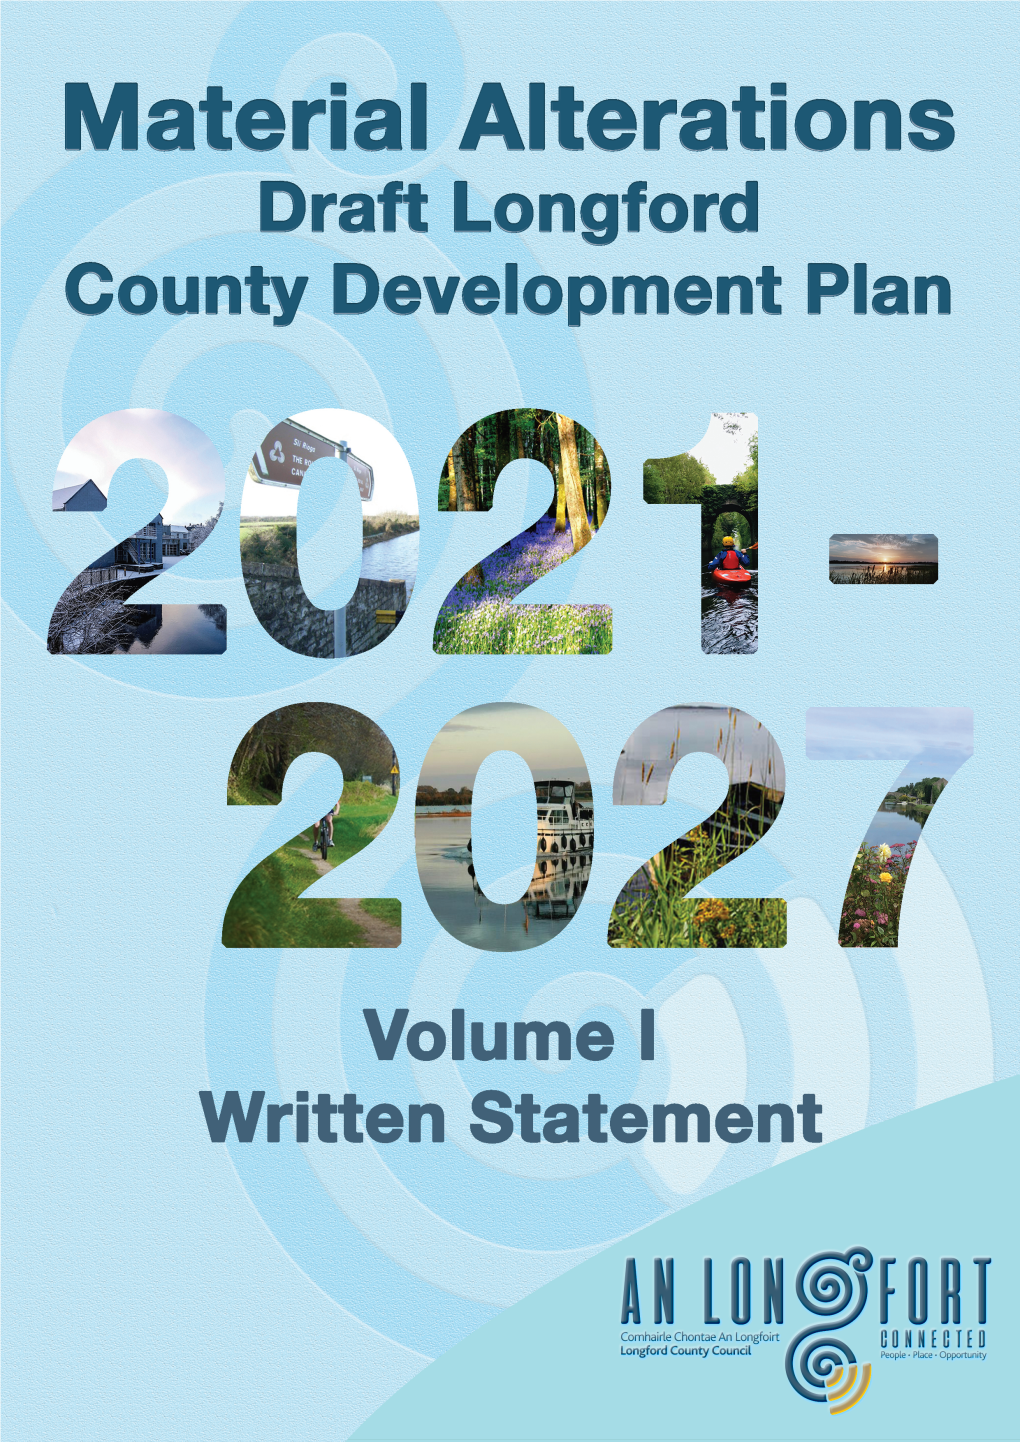 Volume 1: Written Statement Alterations to the Written Statement of the Draft Longford County Development Plan 2021-2027